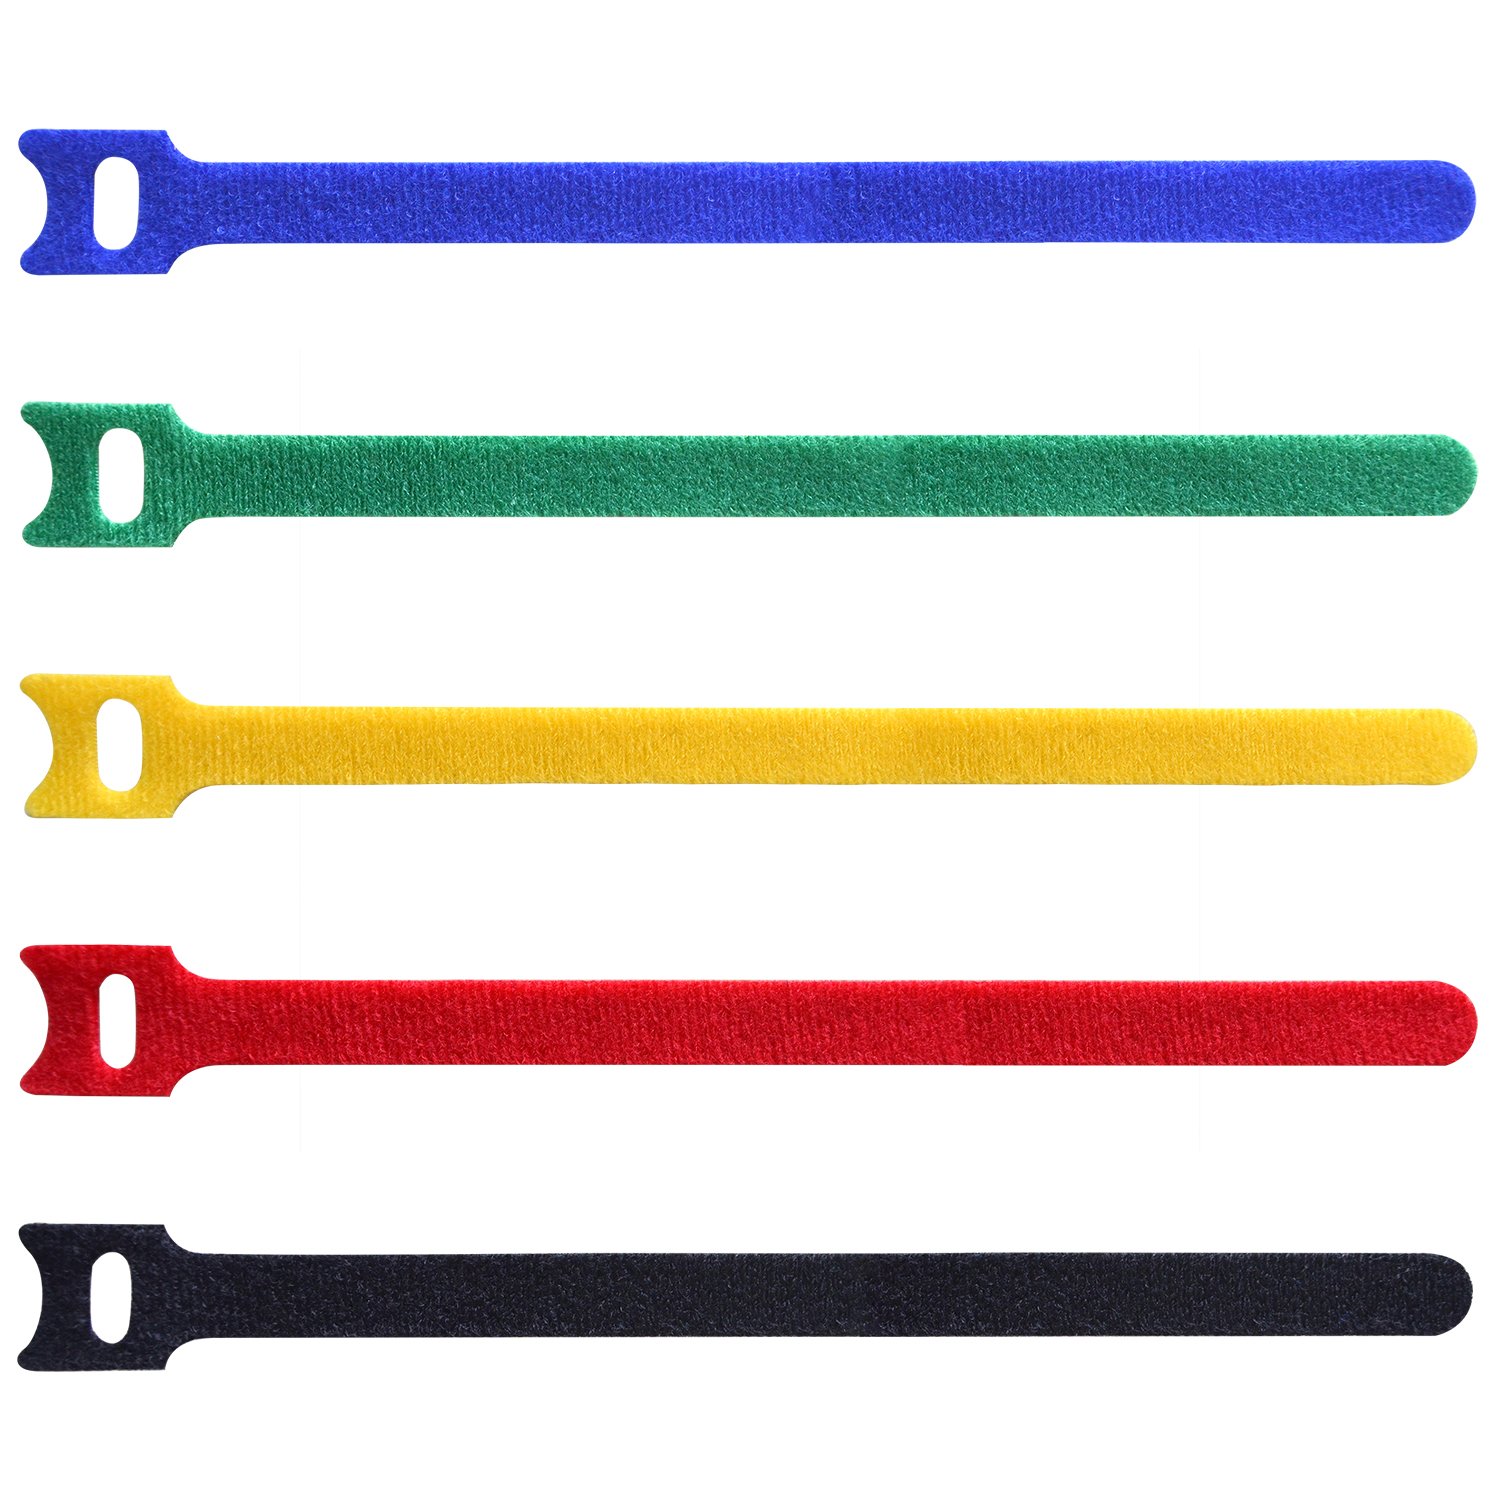 32 Assorted Hook & Loop Cable Wire Ties COLOUR CODE Organise Wrap Tidy Lead Plug 